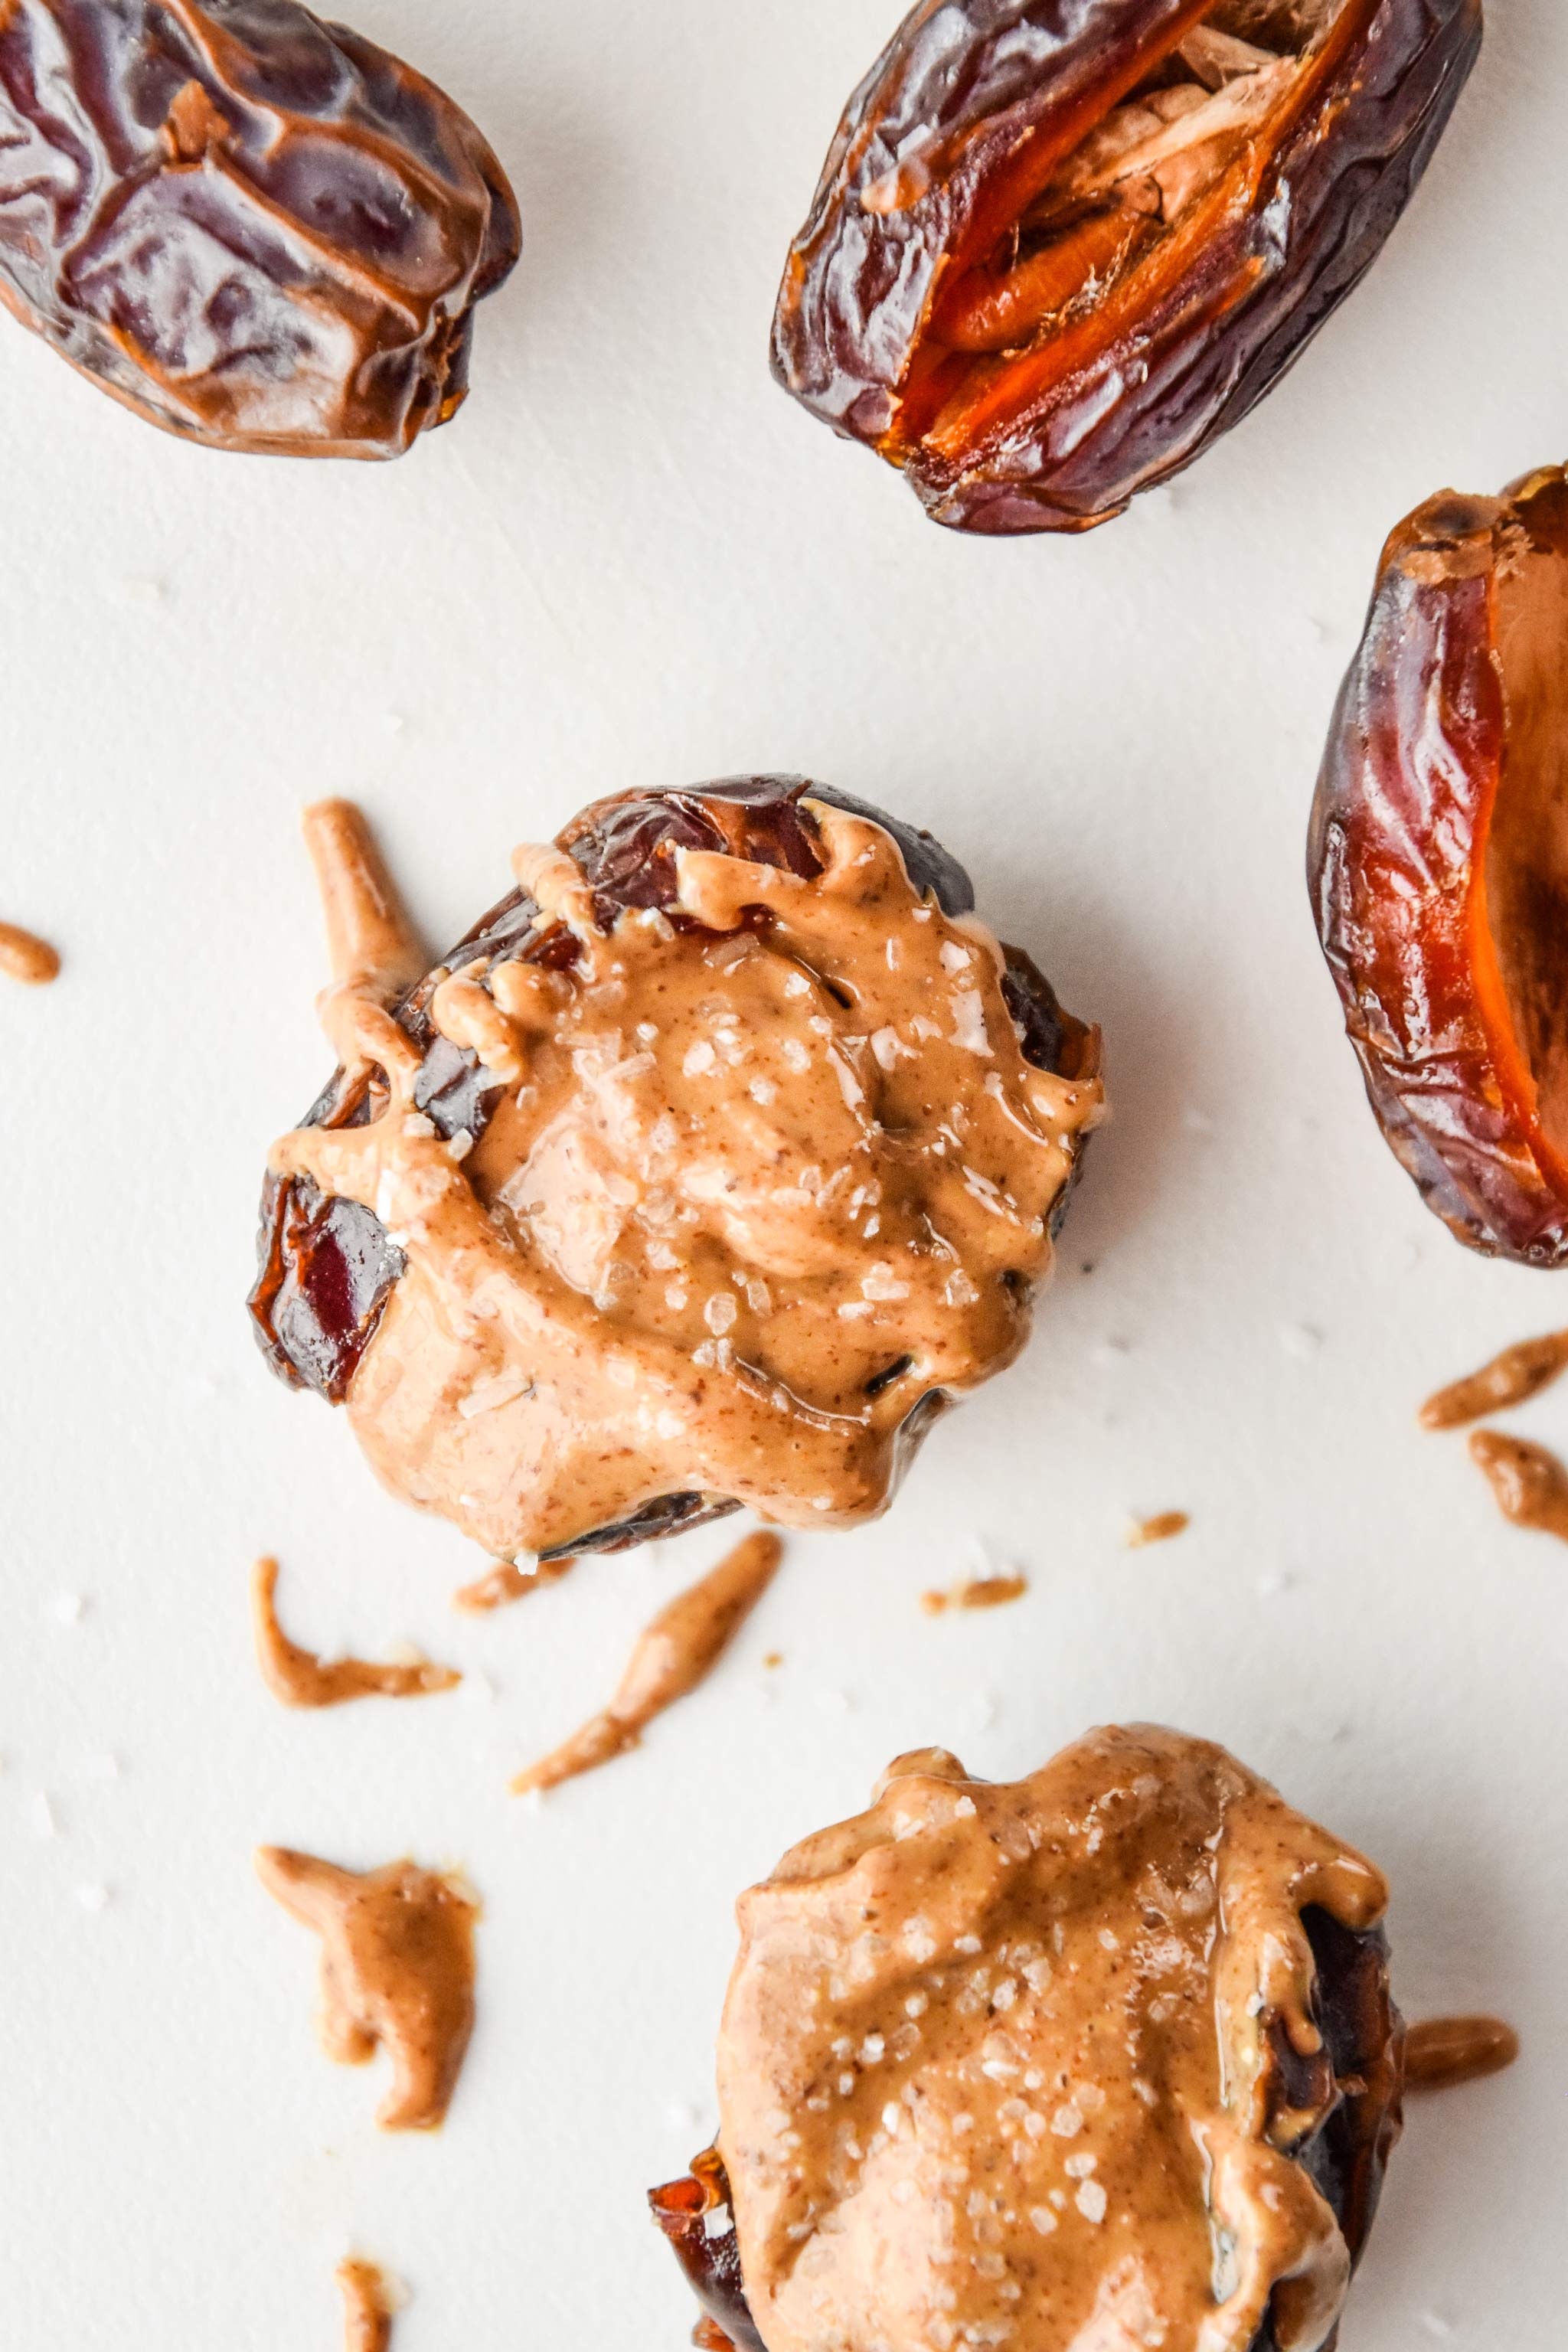 Salted almond butter stuffed dates drizzled with almond butter on a cutting board